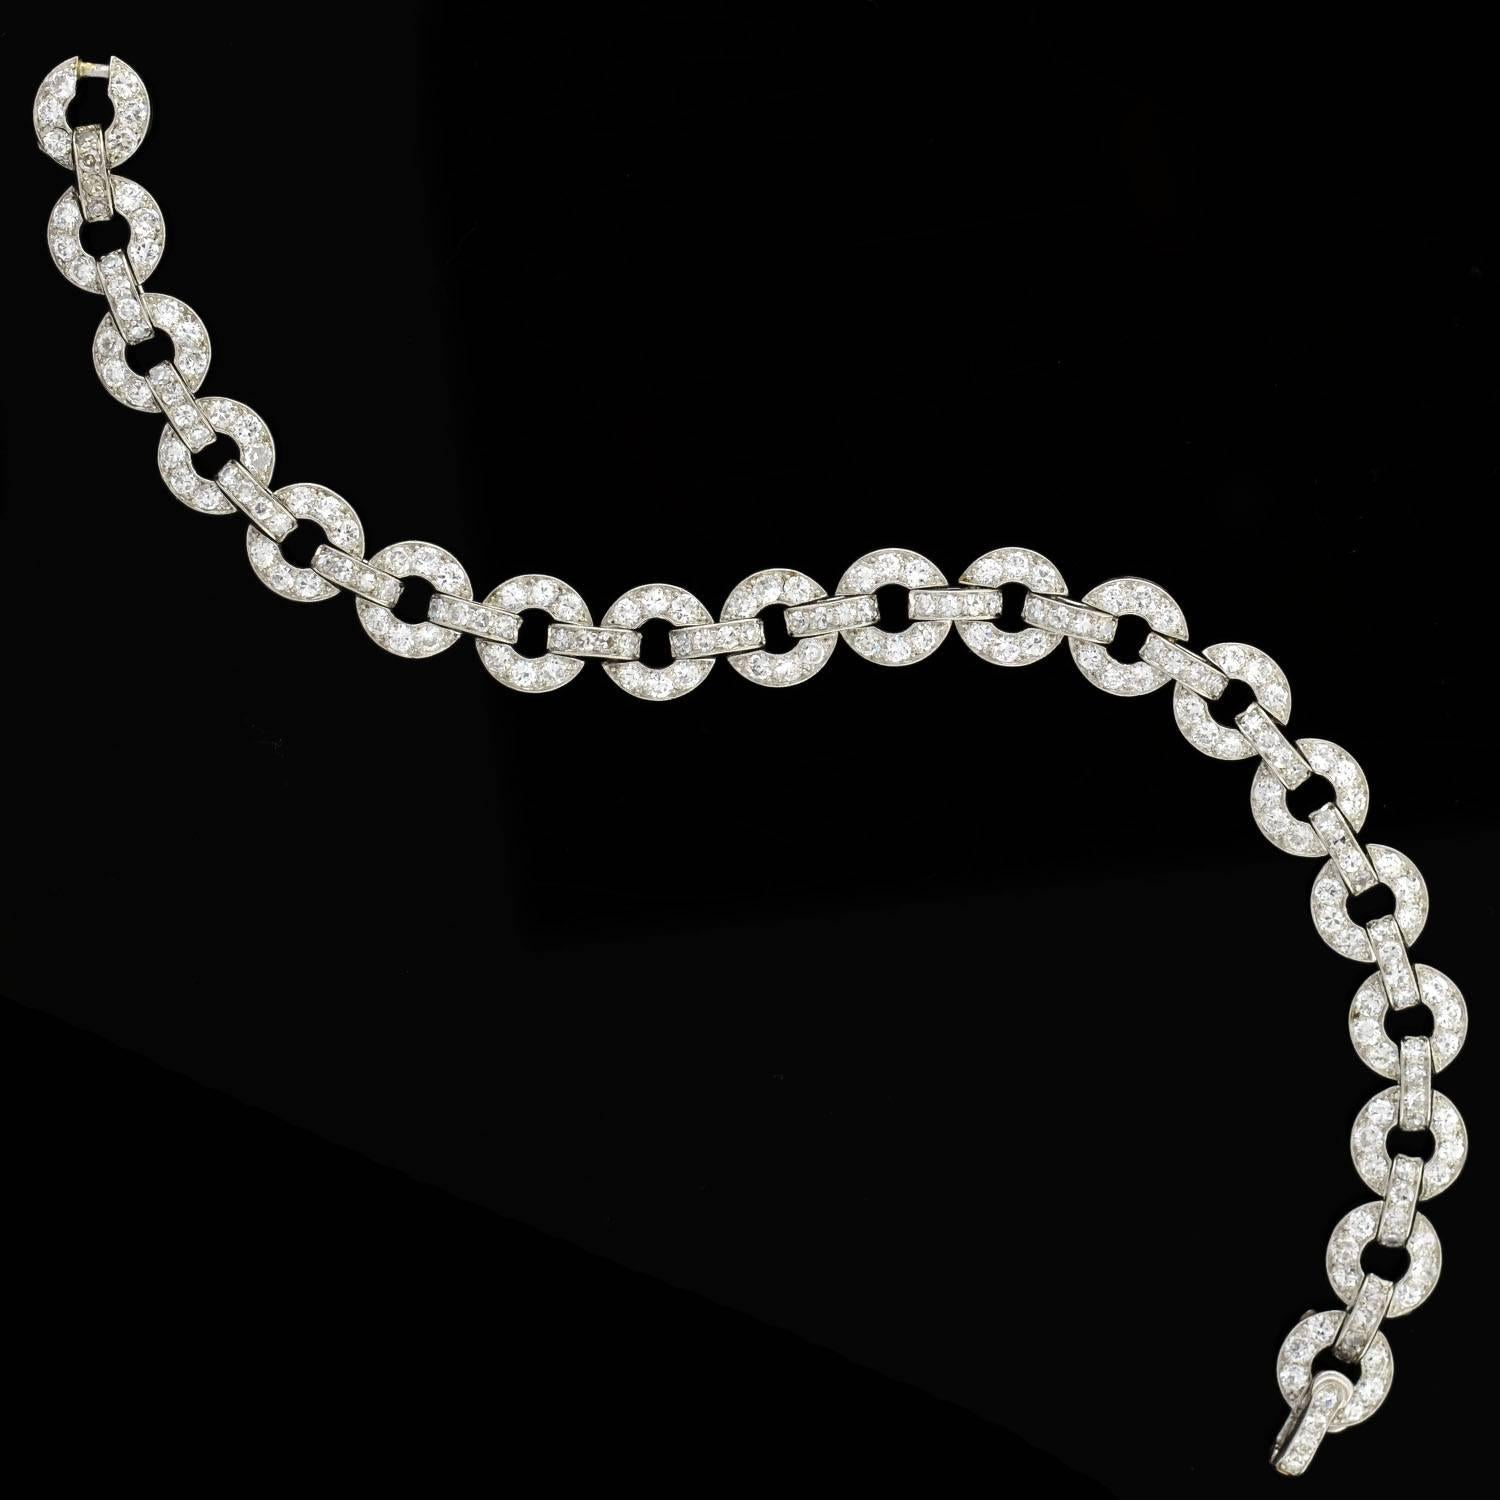 A gorgeous diamond encrusted bracelet from the Art Deco (ca1920) era! This breathtaking piece is made of platinum and features 19 circular links that are hinged together, forming a straight but flexible line bracelet. All of the open links and